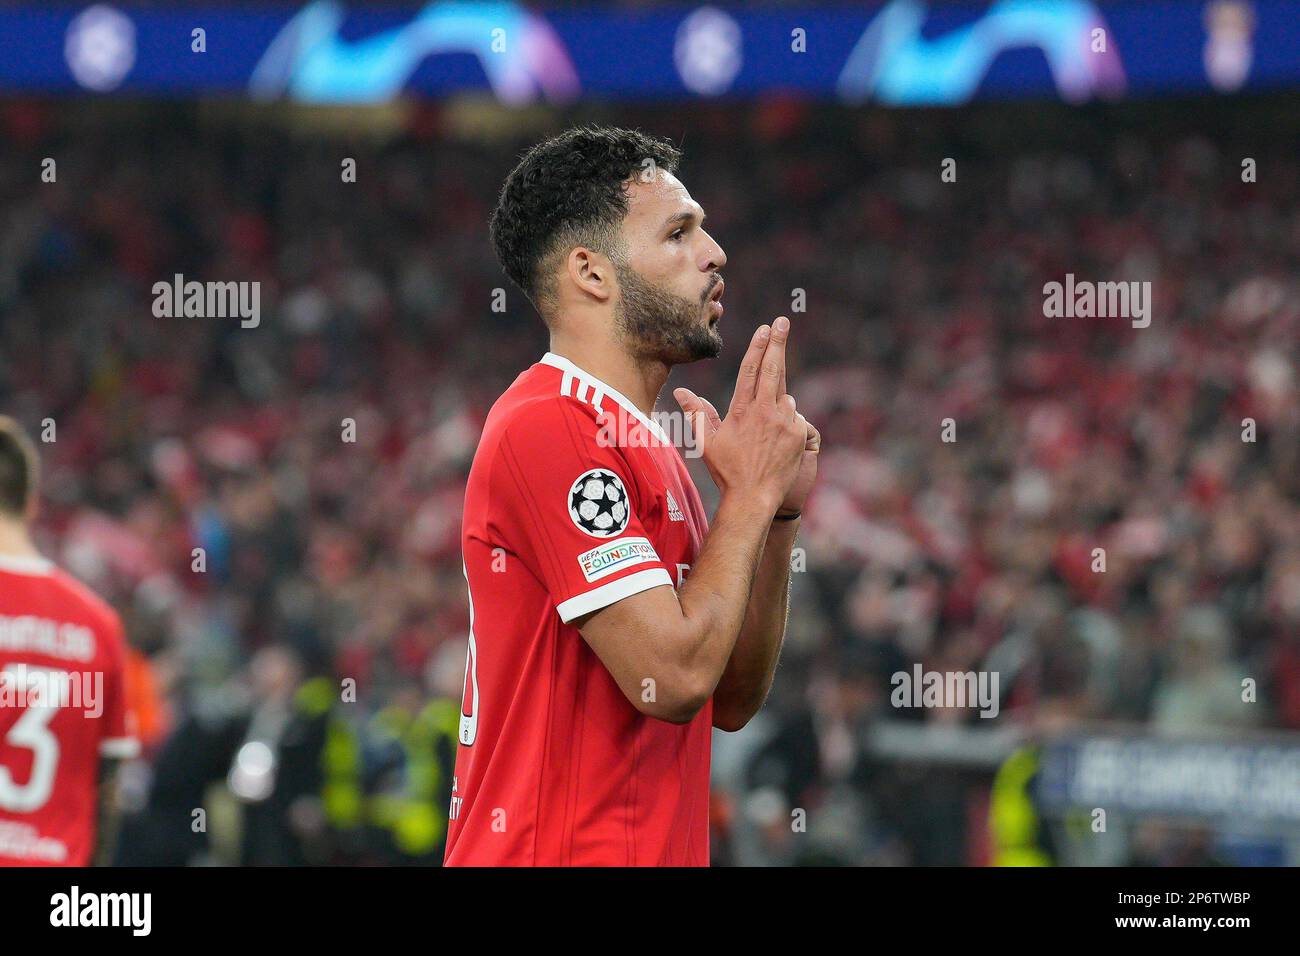 Lisbon, Portugal. 07th Mar, 2023. Goncalo Ramos from SL Benfica celebrates a goal during the Round of 16, 2nd Leg UEFA Europa League football match between SL Benfica and Clube Brugge KV at Estadio da Luz. Final score: SL Benfica 5:1 Clube Brugge KV (Photo by Bruno de Carvalho/SOPA Images/Sipa USA) Credit: Sipa USA/Alamy Live News Stock Photo